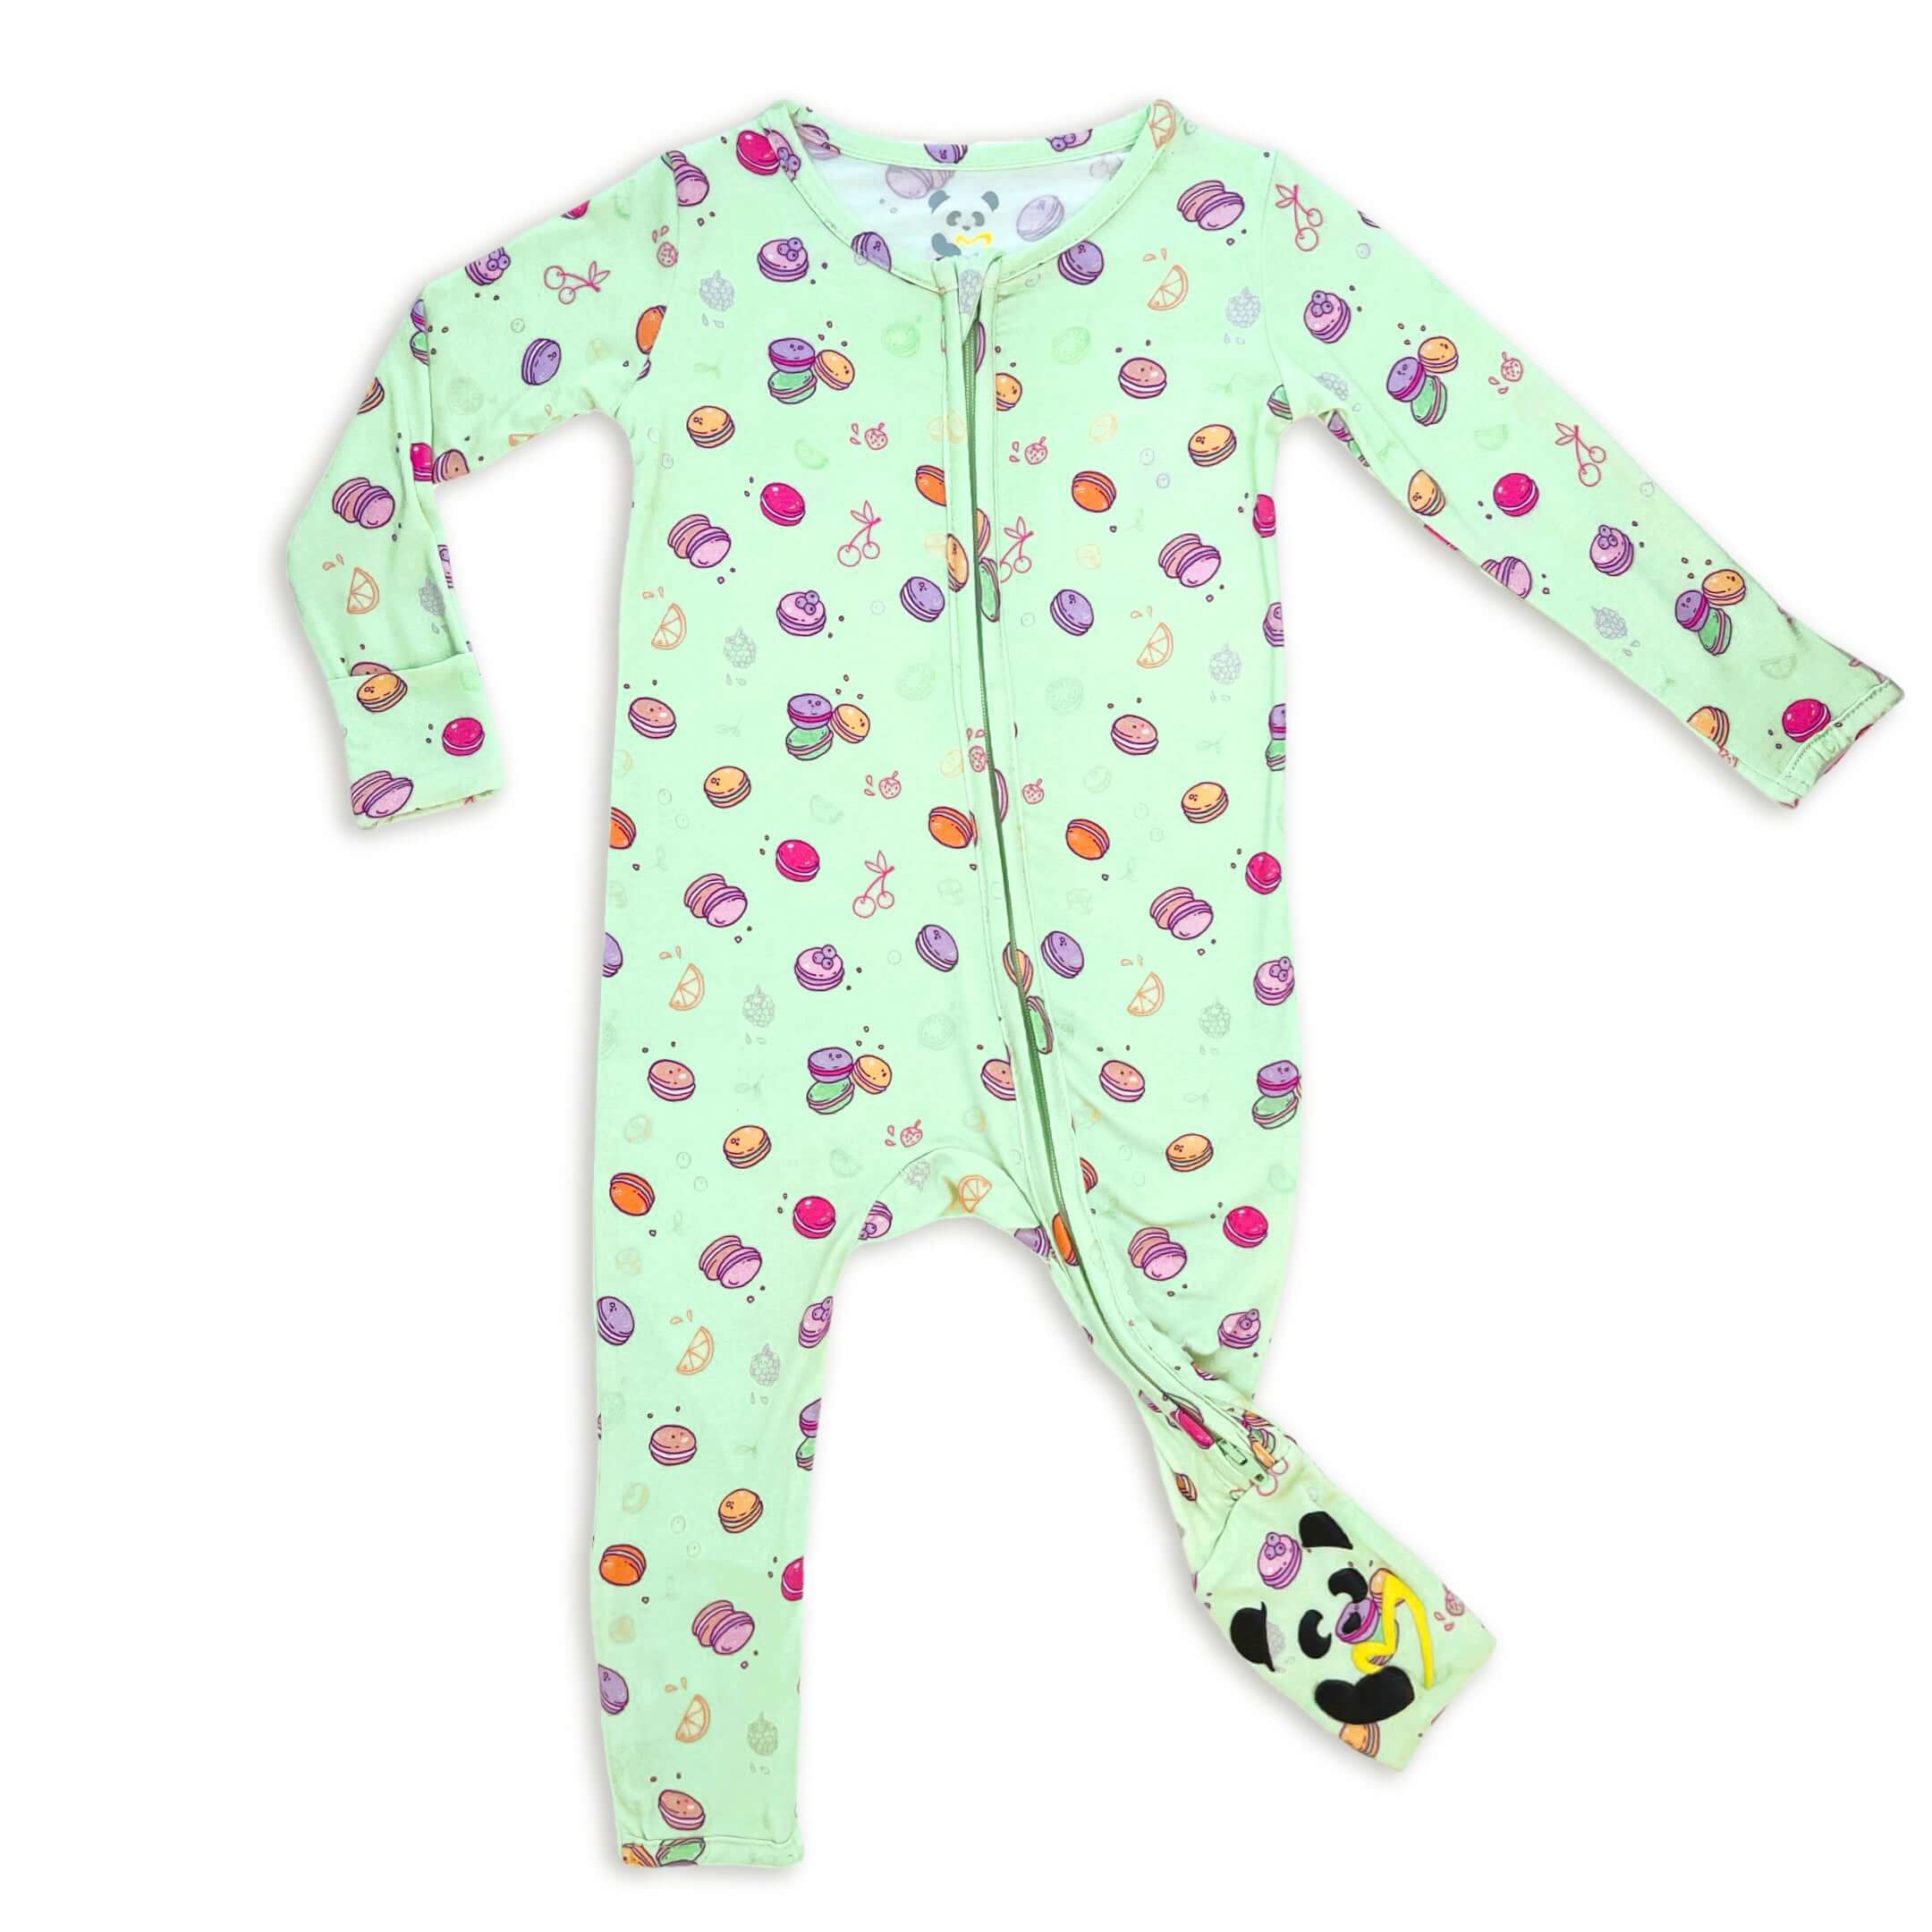 Bamboo Baby Clothes | Bamboo Kids Clothing